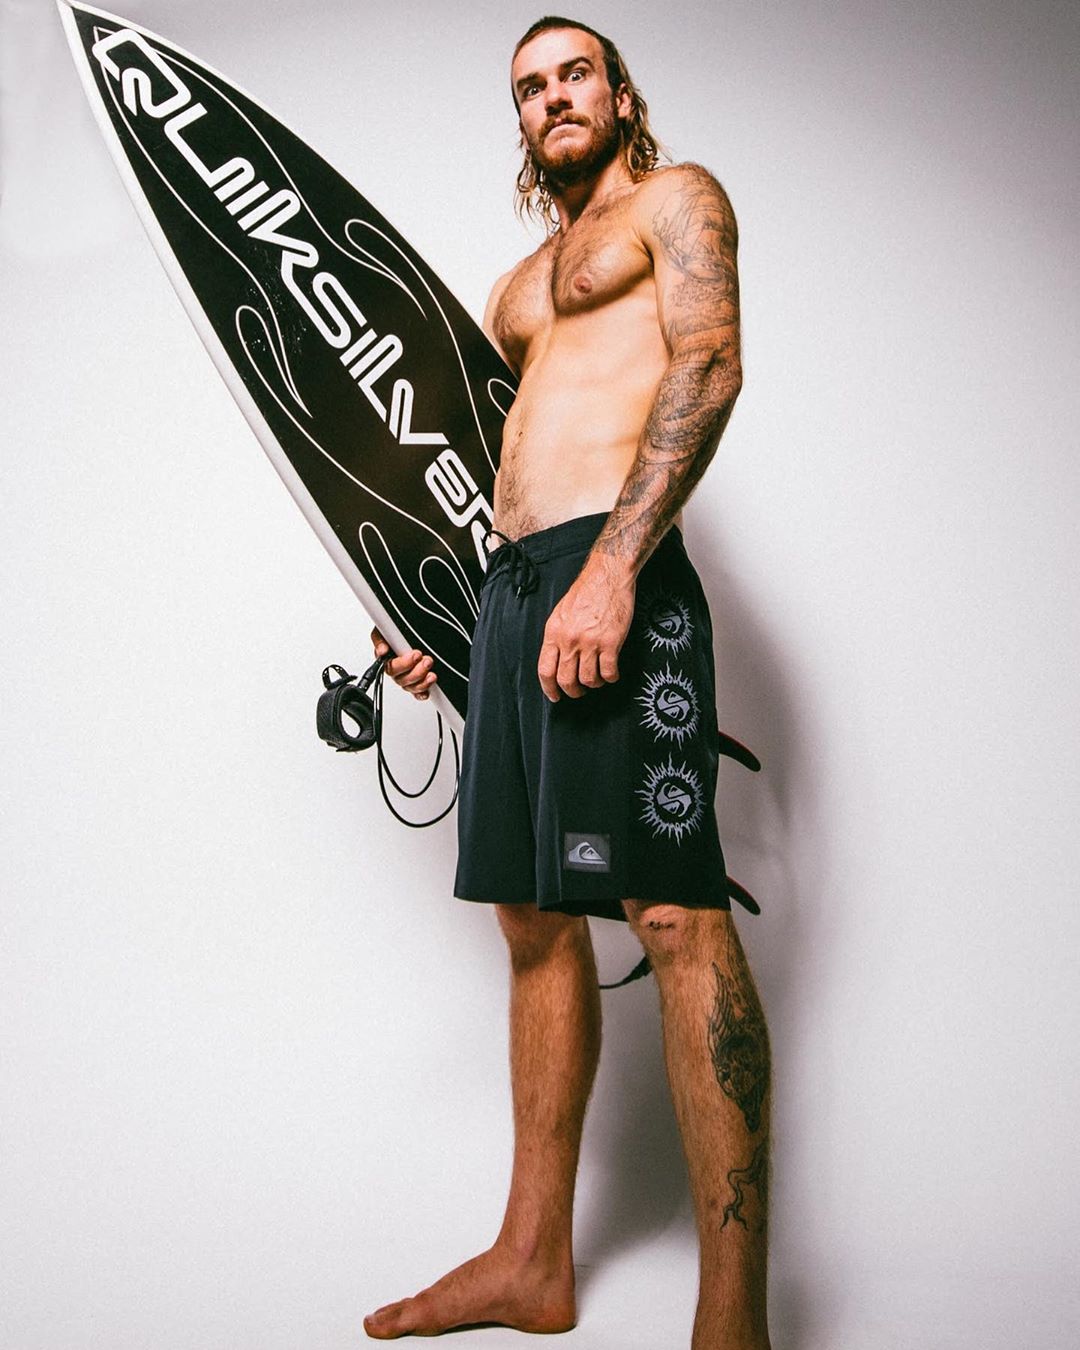 Quiksilver - Boardshorts with attitude. @mikeywright69 in the Highline Rave Arch from the new 69 Capsule.